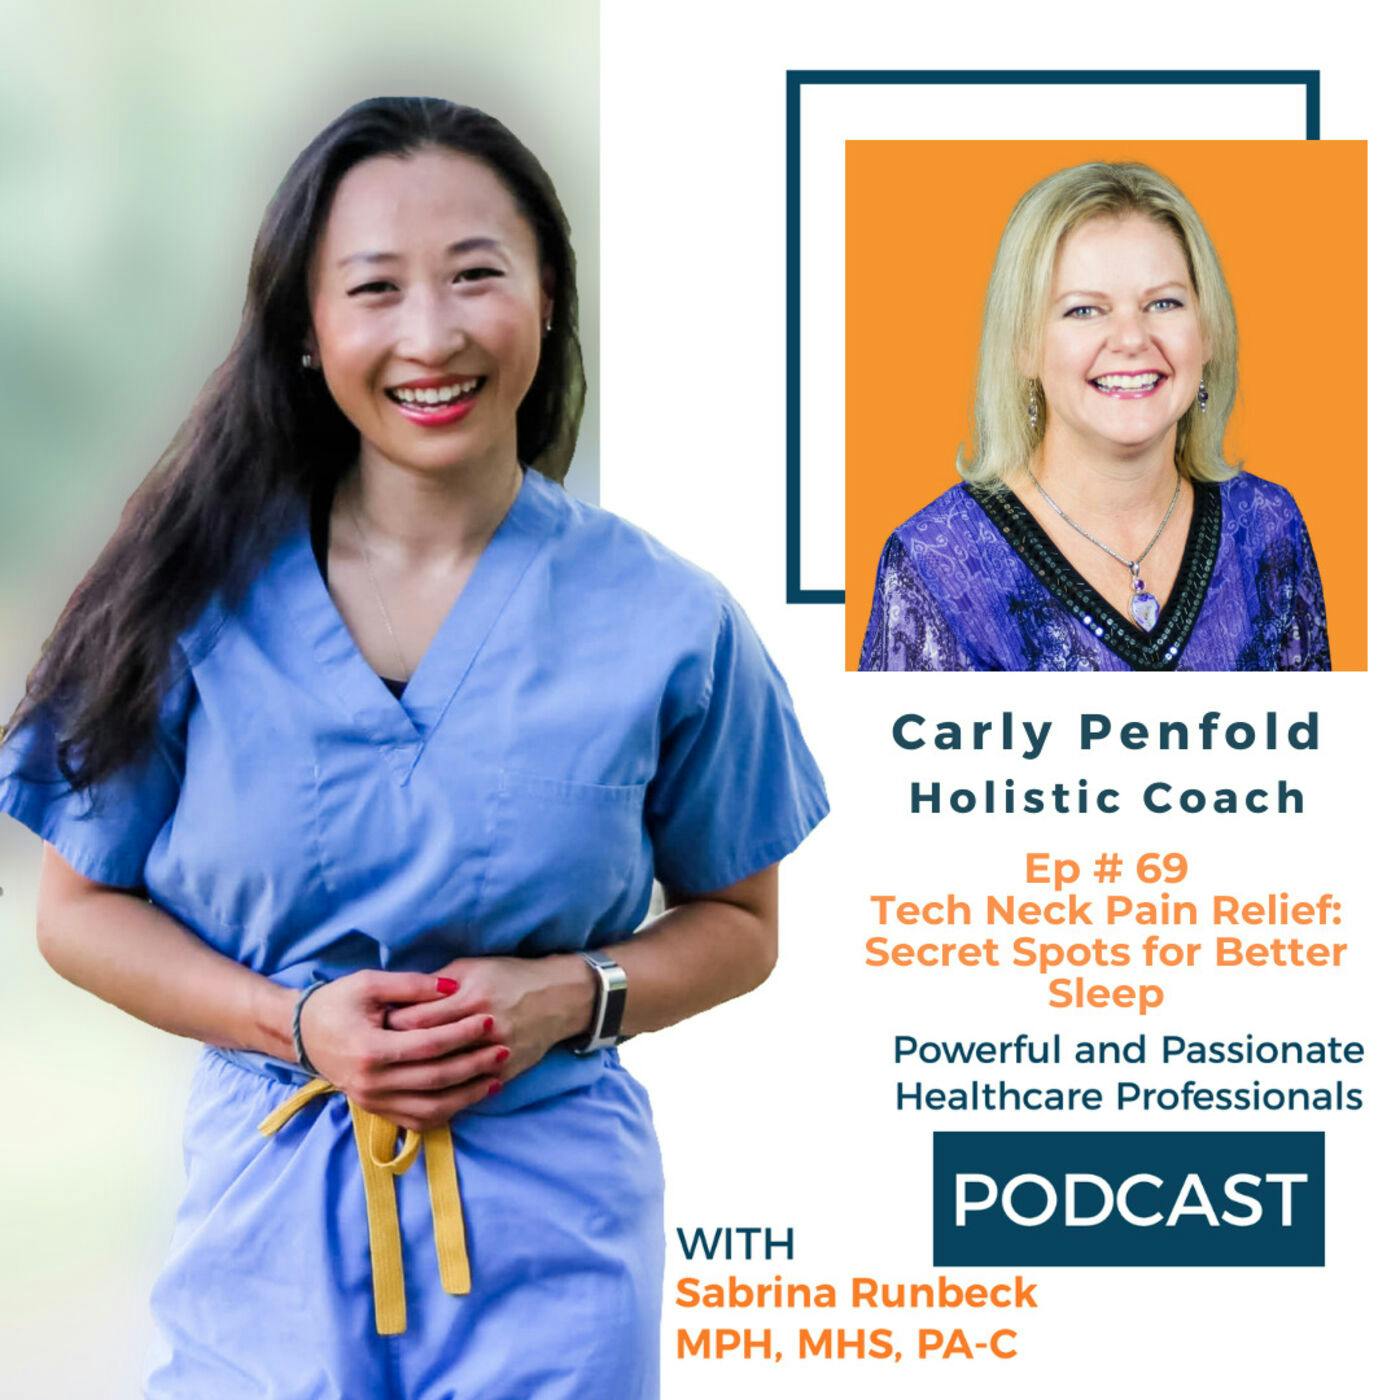 Ep 69 – Tech Neck Pain Relief: Secret Spots for Better Sleep with Carly Penfold